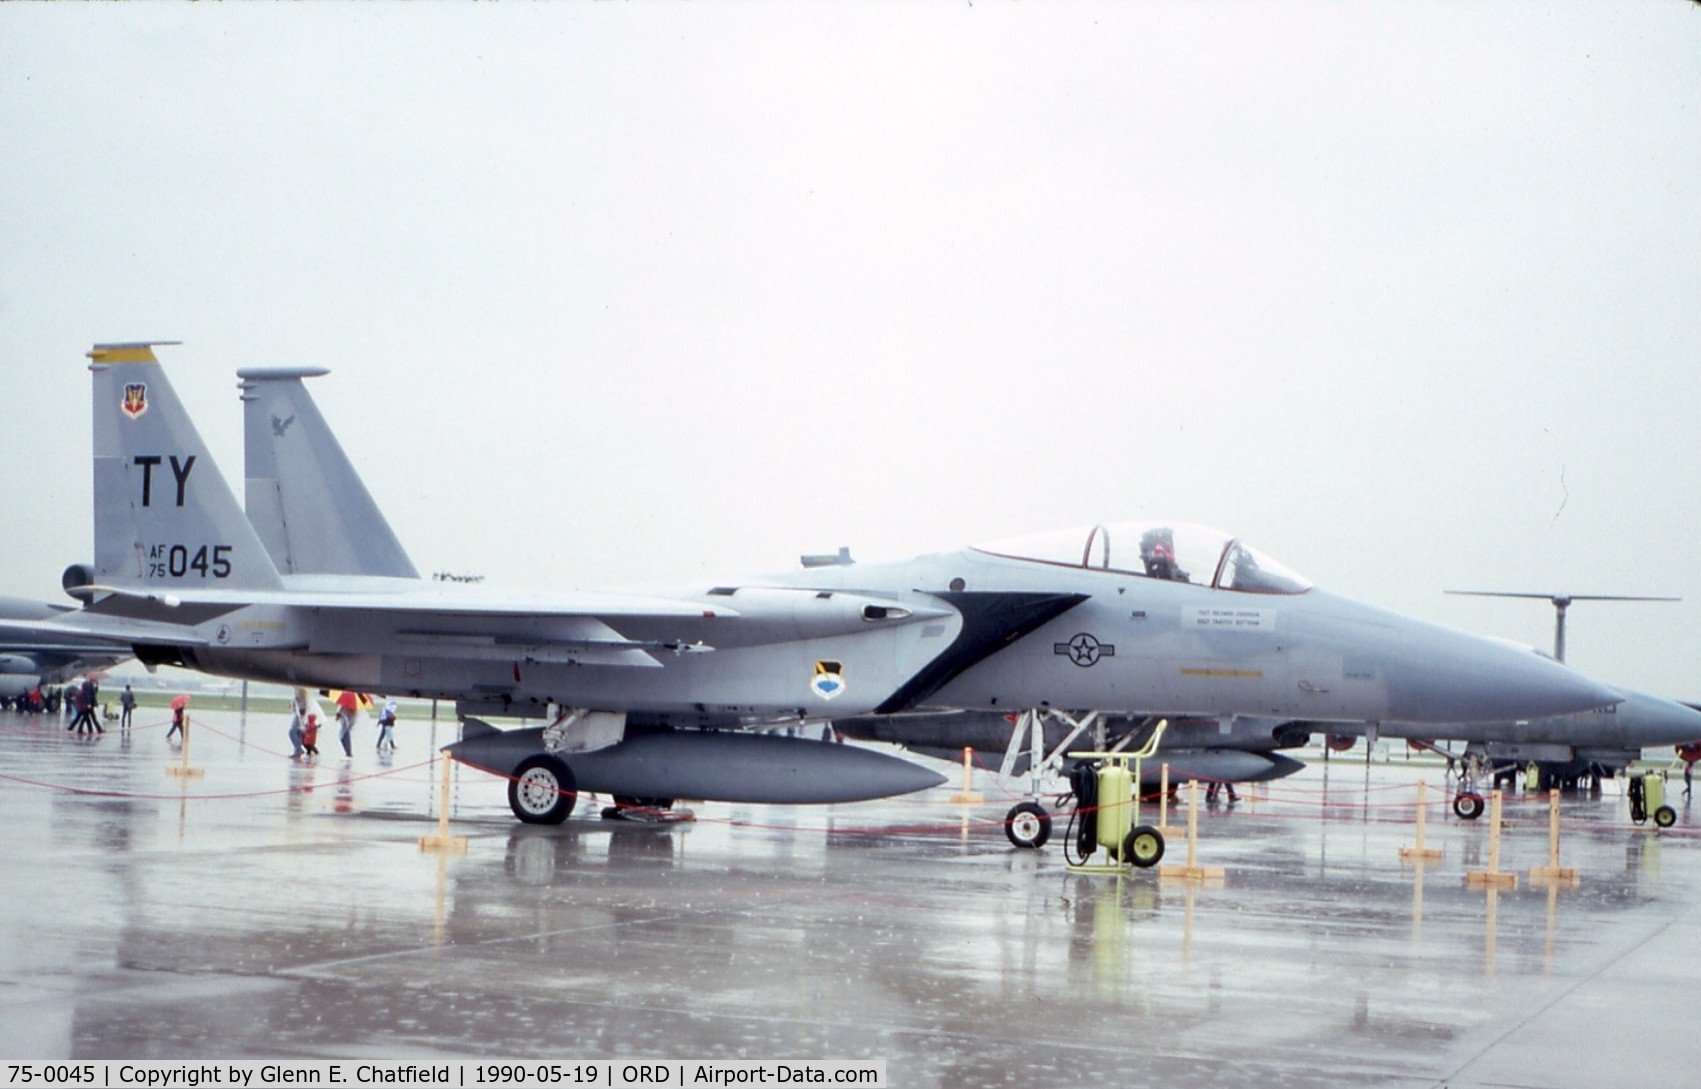 75-0045, 1975 McDonnell Douglas F-15A-13-MC Eagle C/N 145/A125, F-15A at the ANG/AFR open house.  Very rainy day.